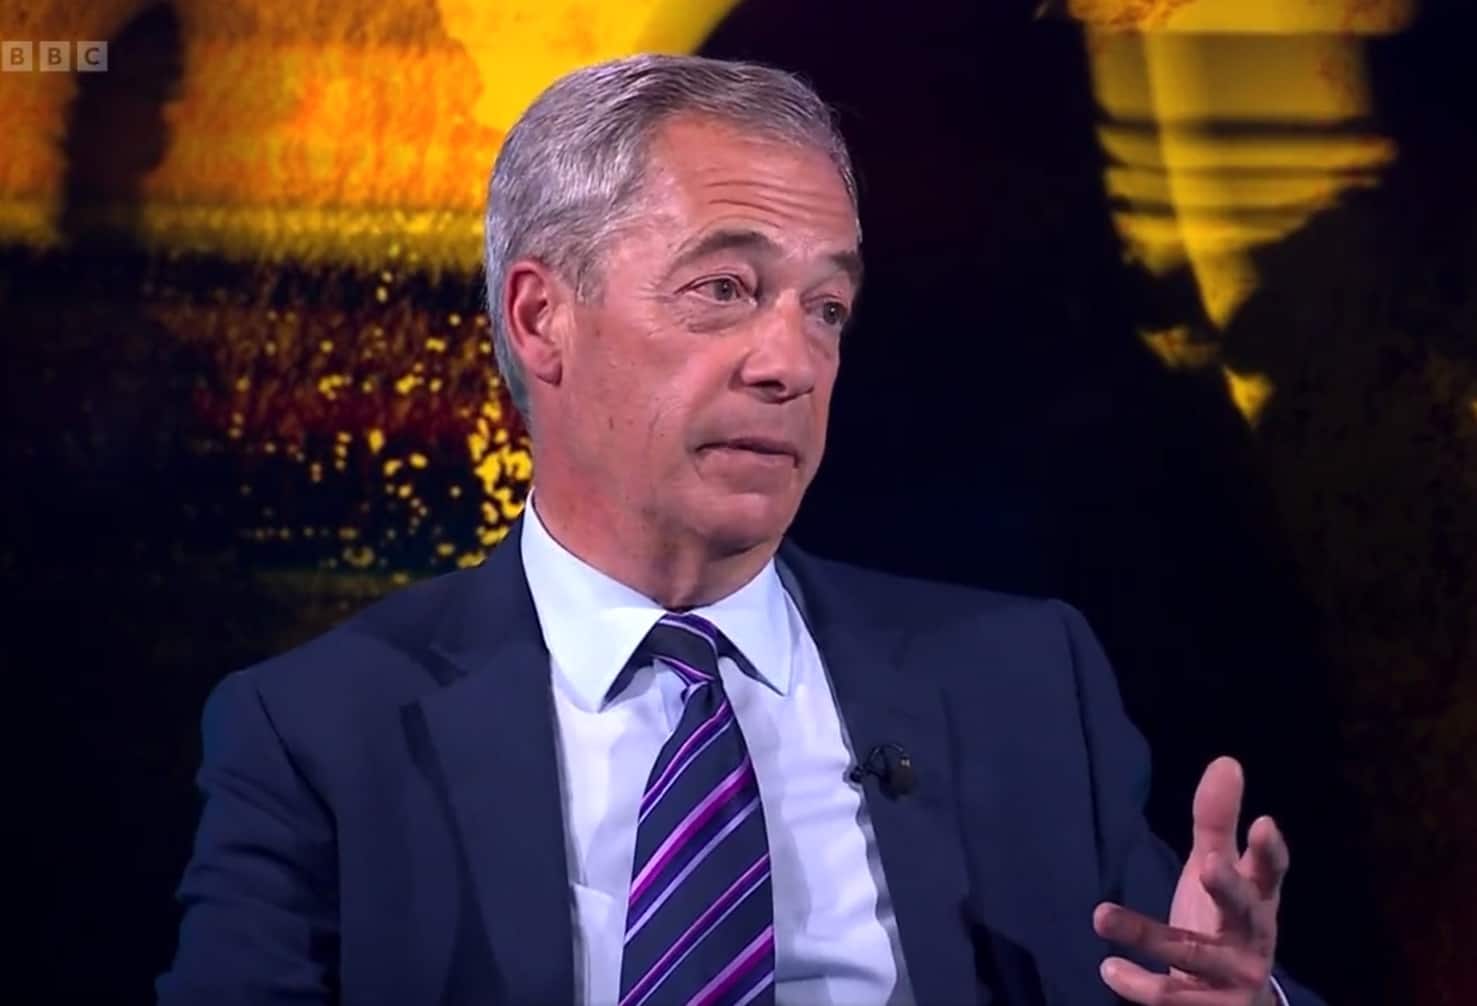 Farage dubbed a ‘racist’, ‘xenophobic’ and ‘disingenuous grifter’ in leaked Coutts memo